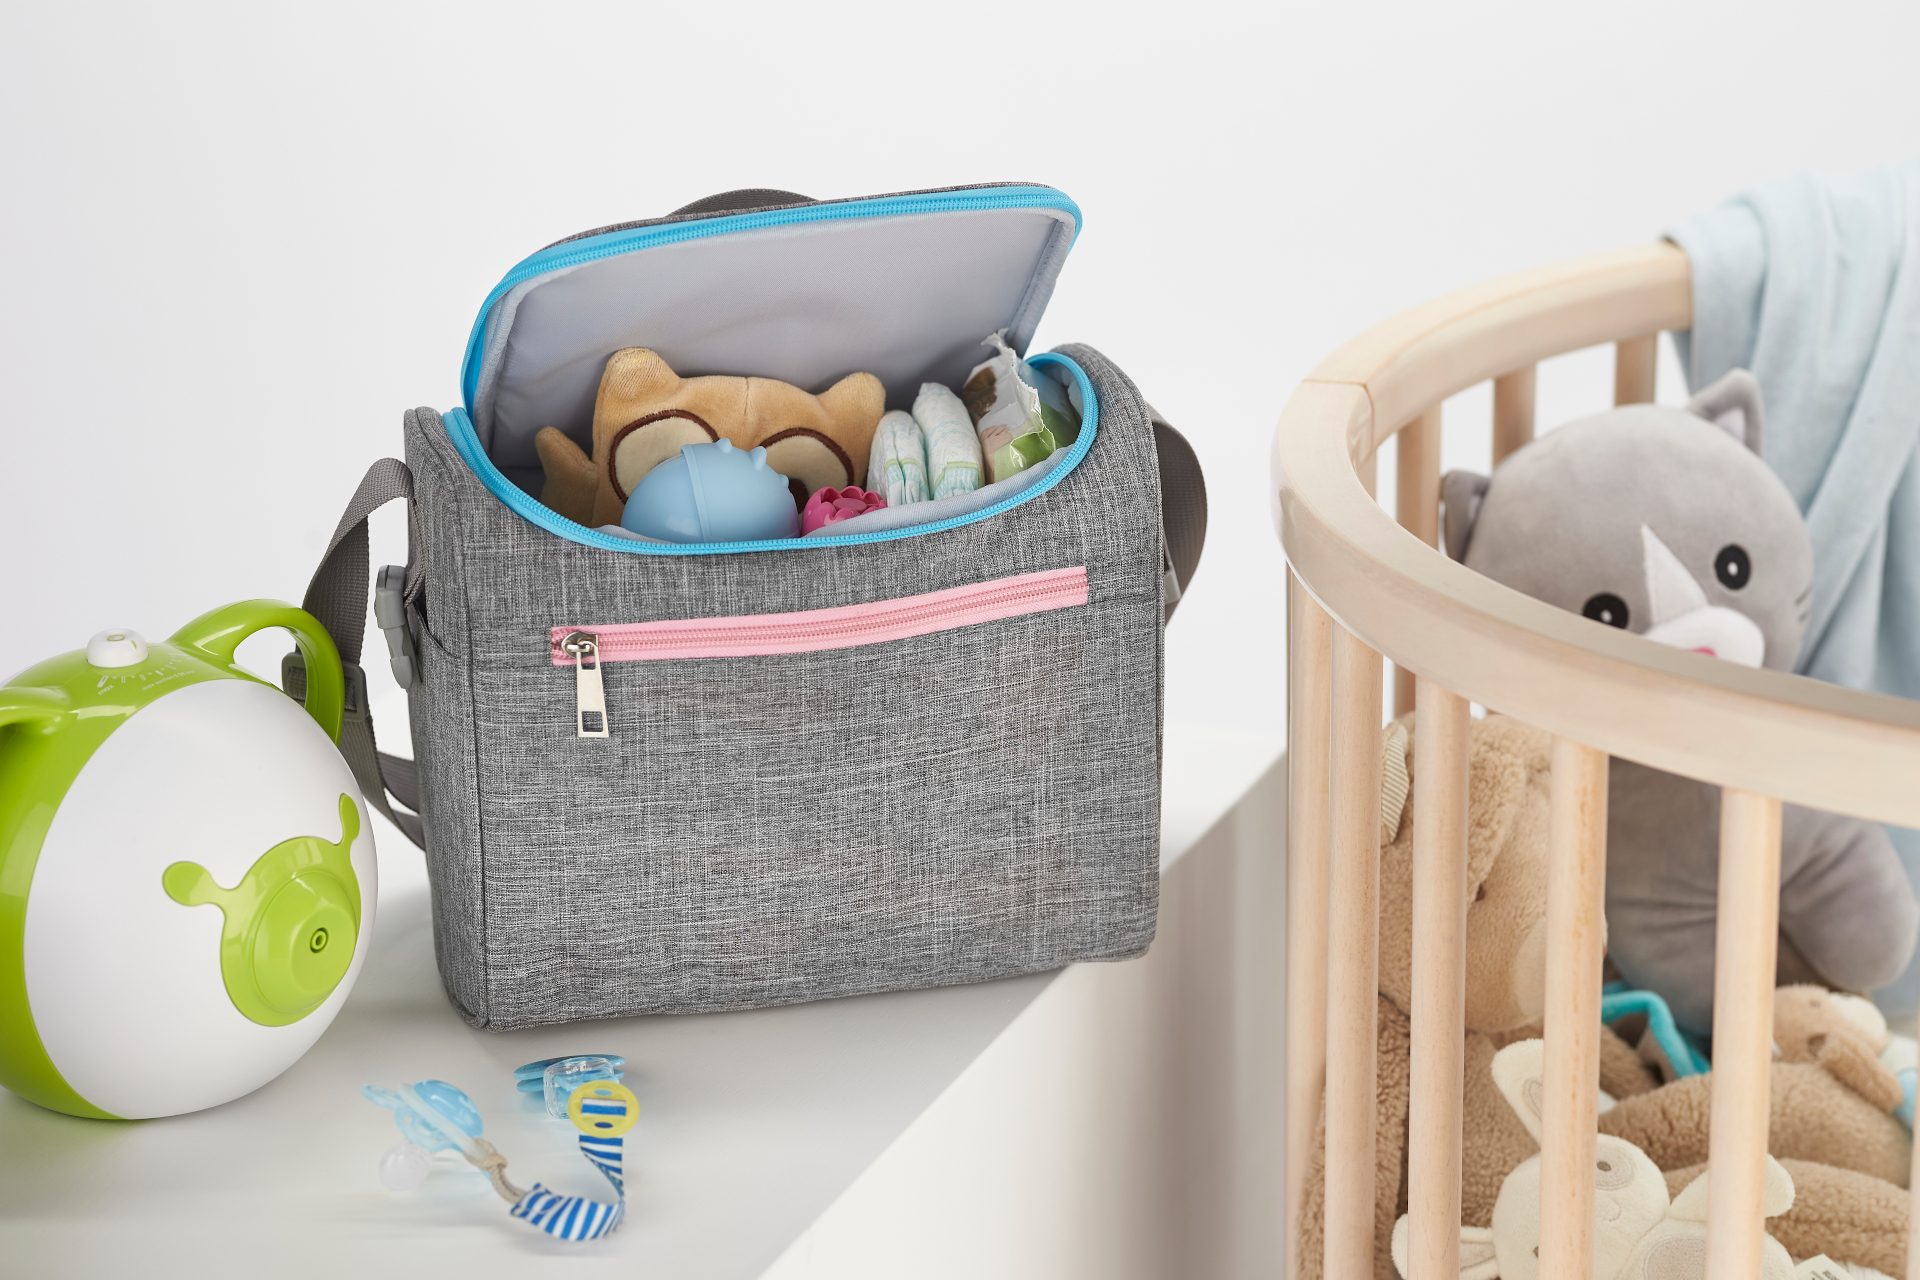 Nosiboo Bag Baby Organizer on a shelf next to the baby cot bed and filled with baby accessories